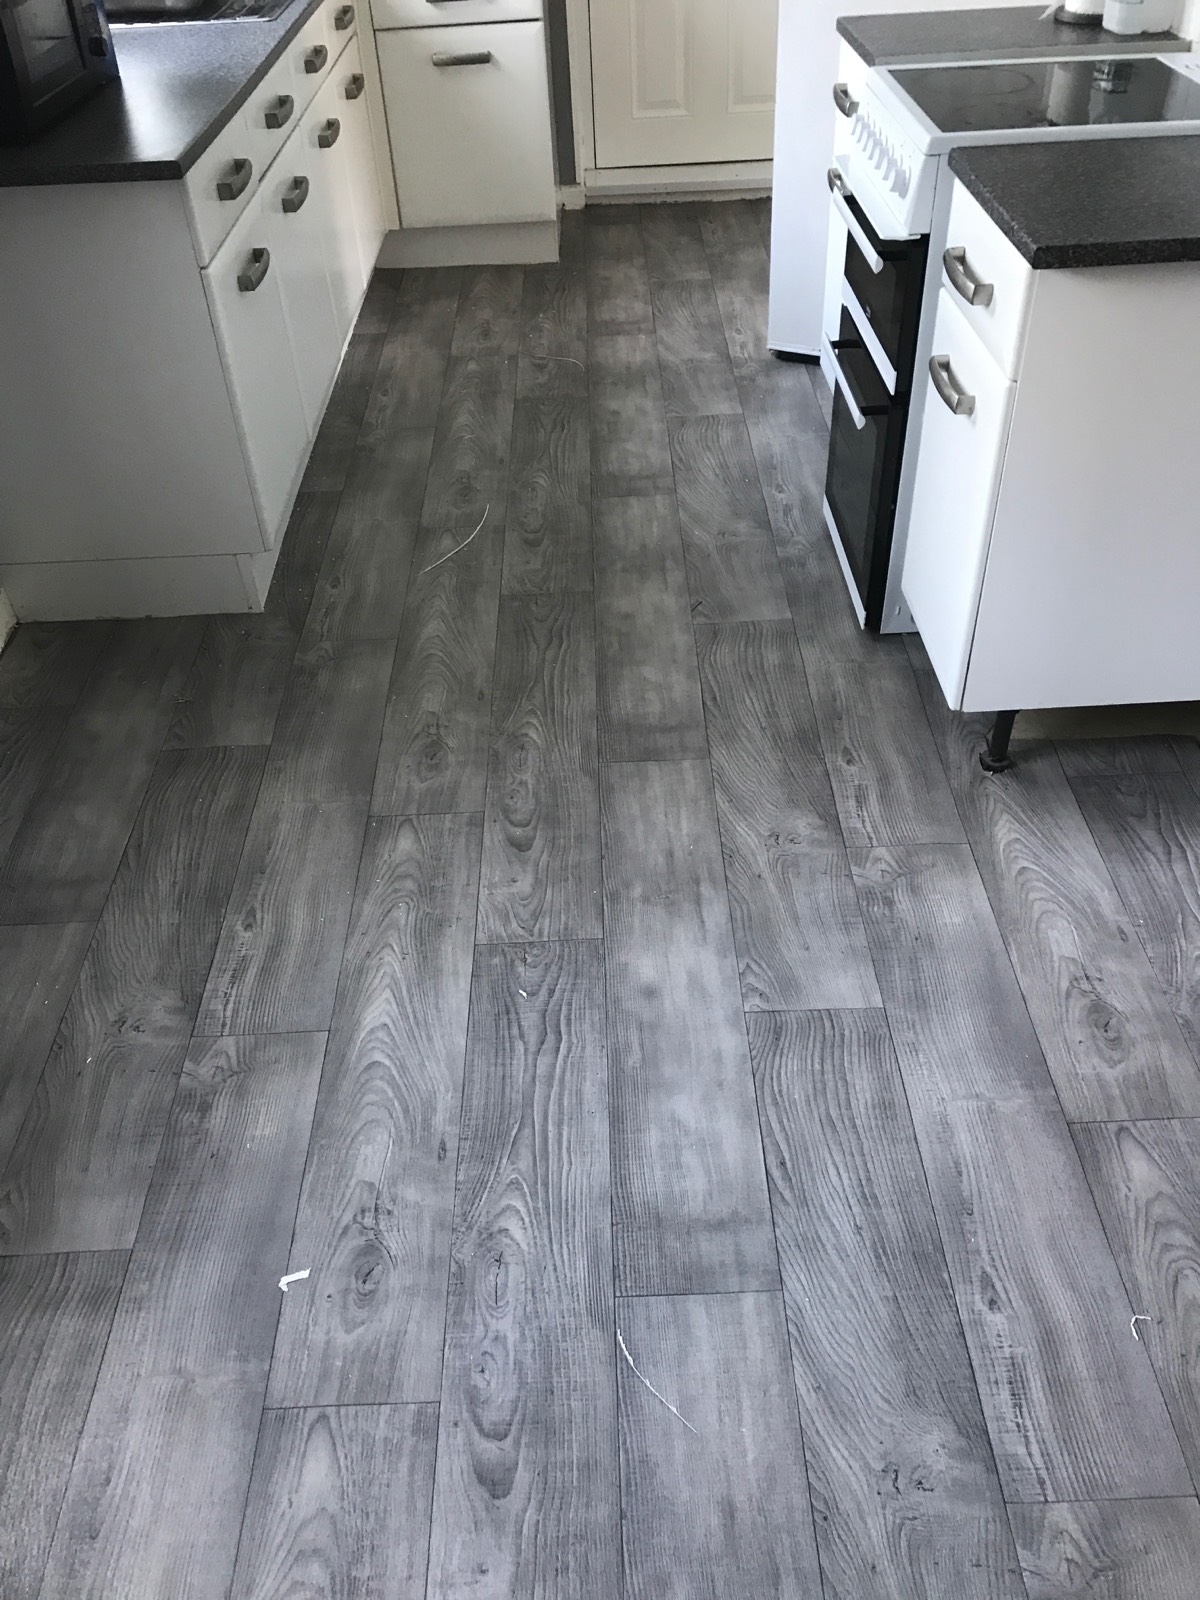 light grey vinyl flooring with laminate design in kitchen with white units